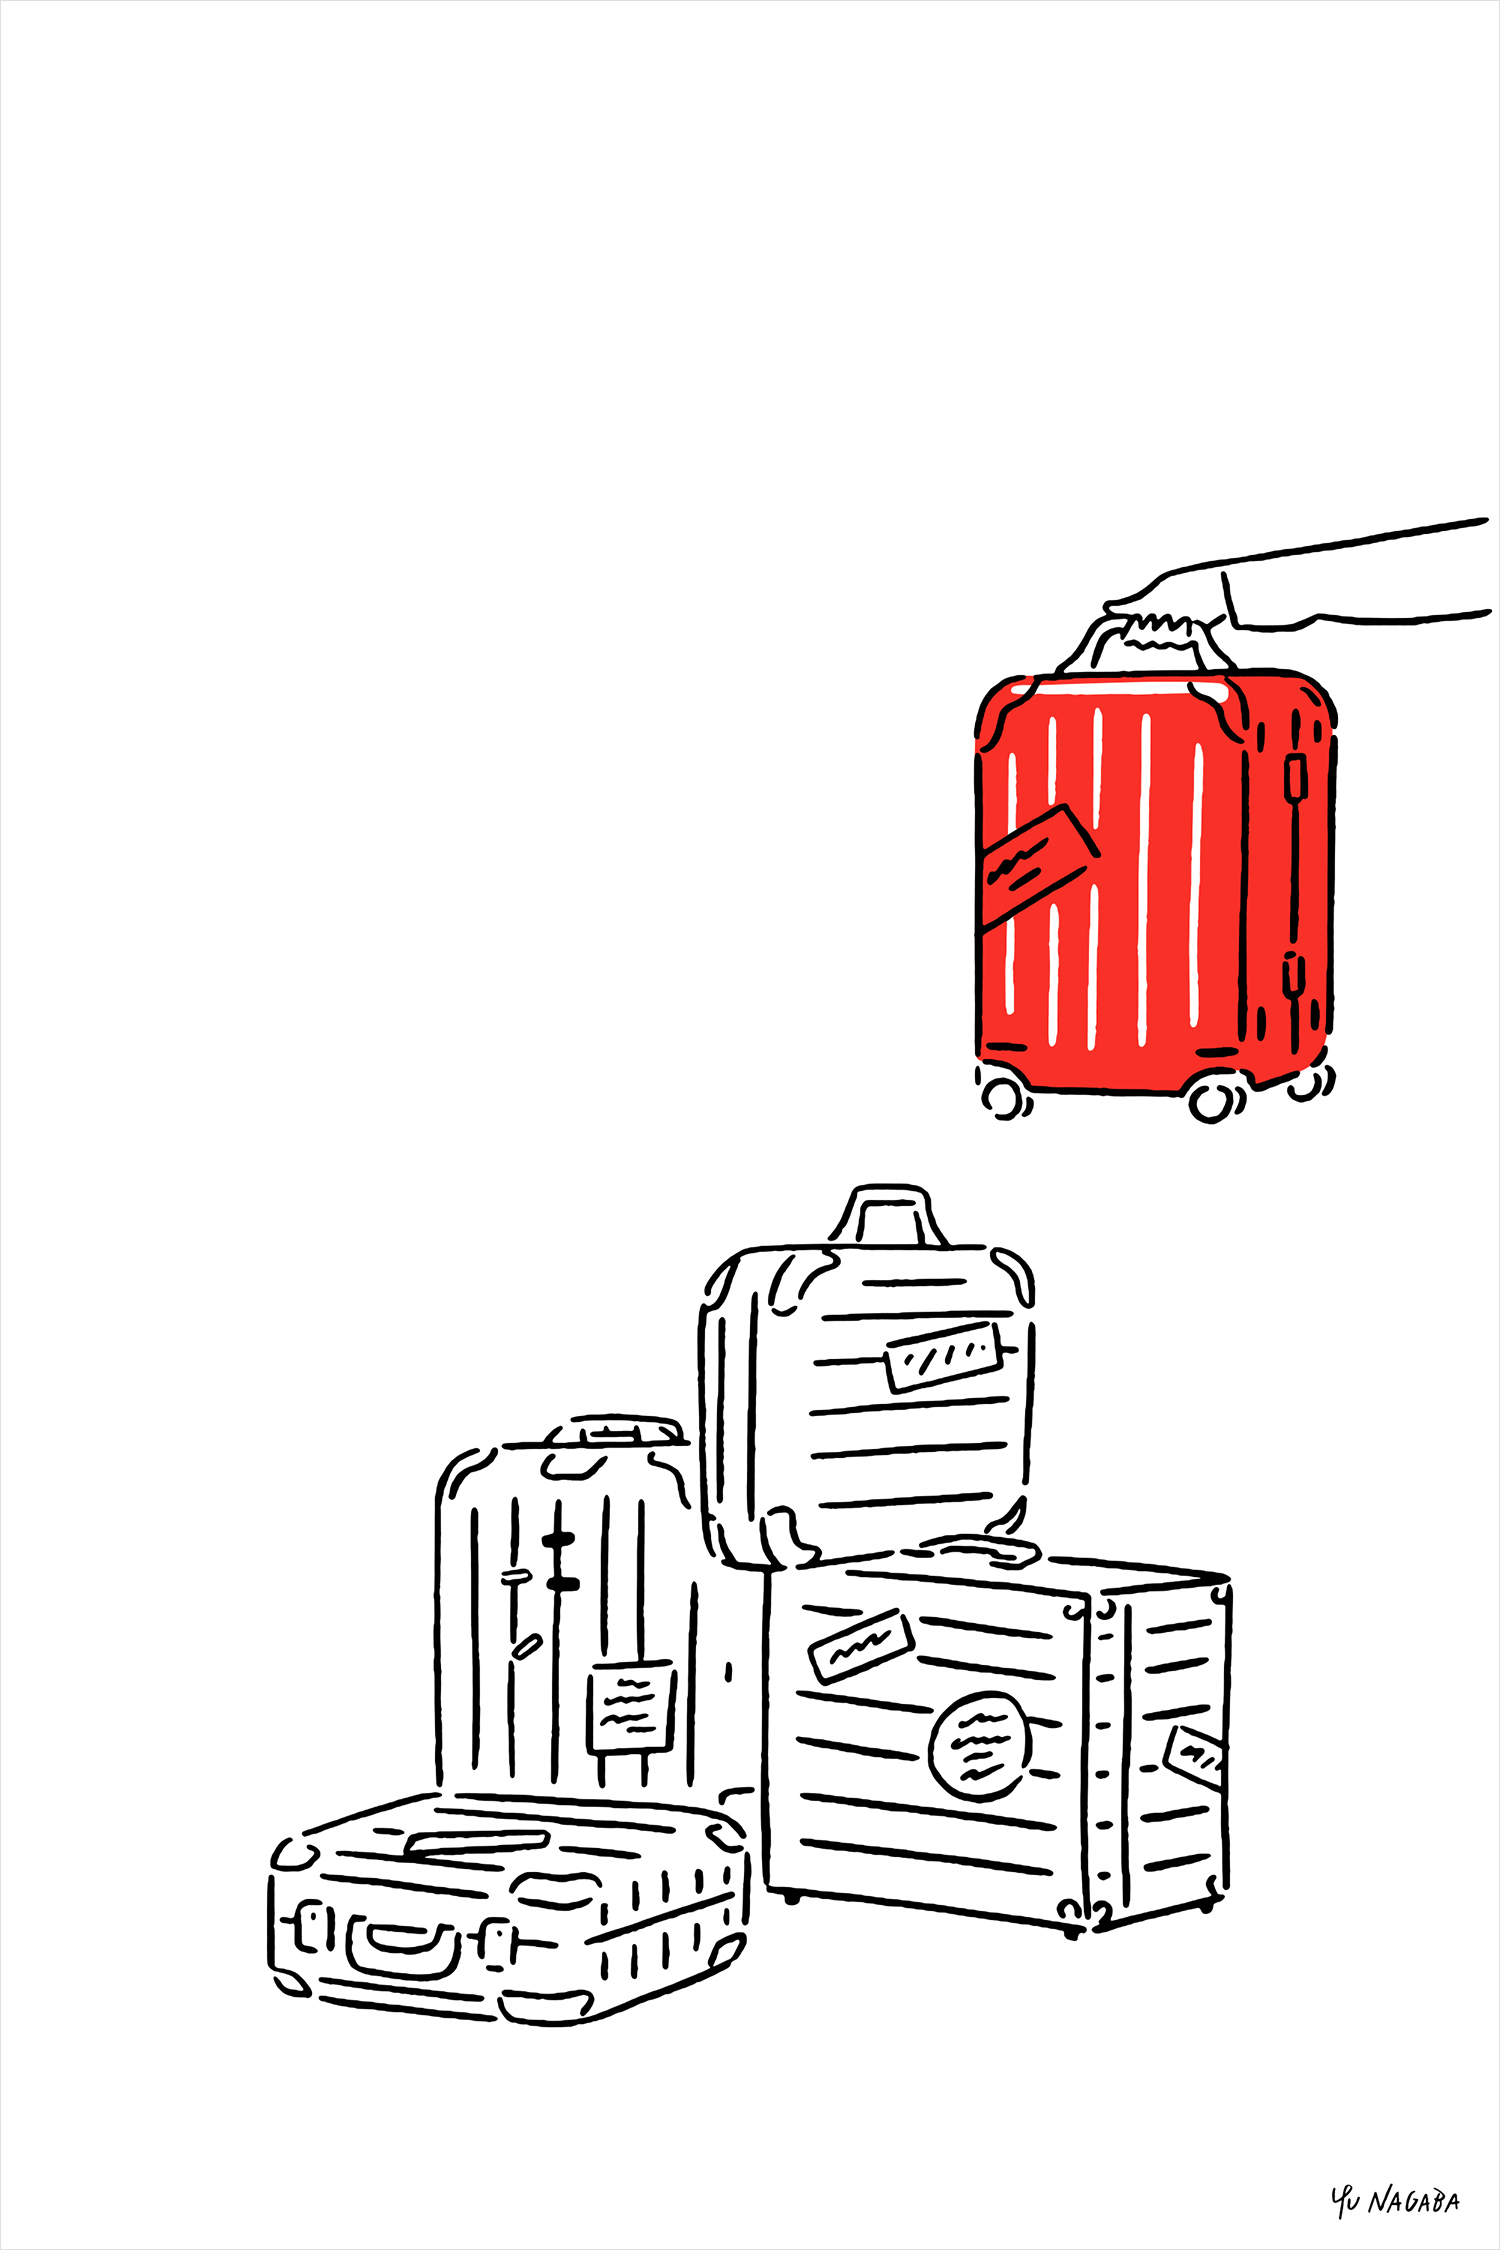 Illustration in Branding – Rimowa by Commission, United Kingdom